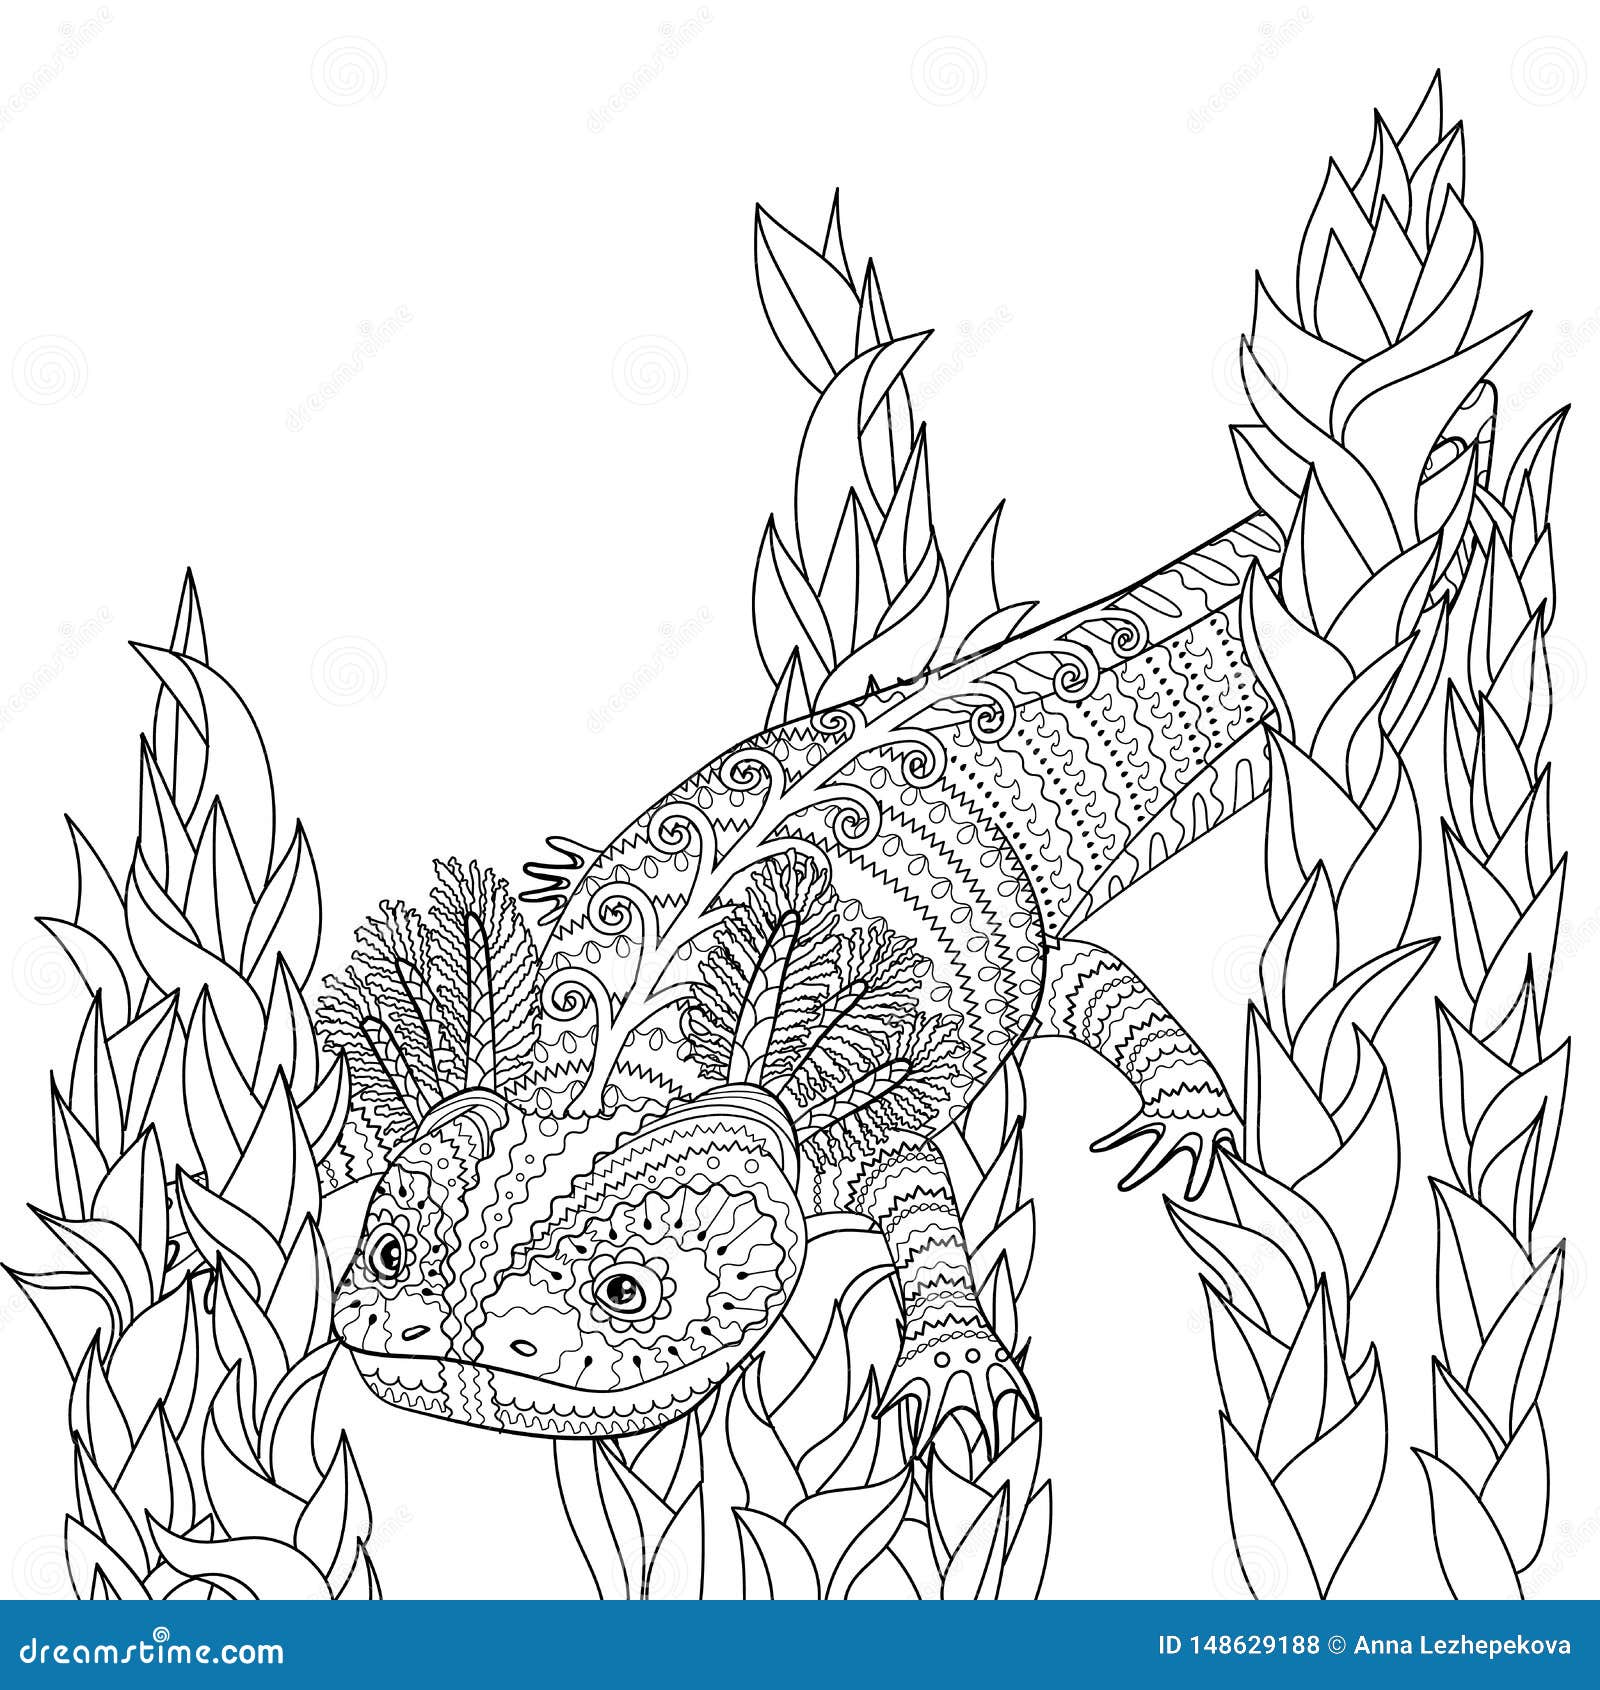 Coloring Page with Axolotl in Patterned Style. Stock Vector ...